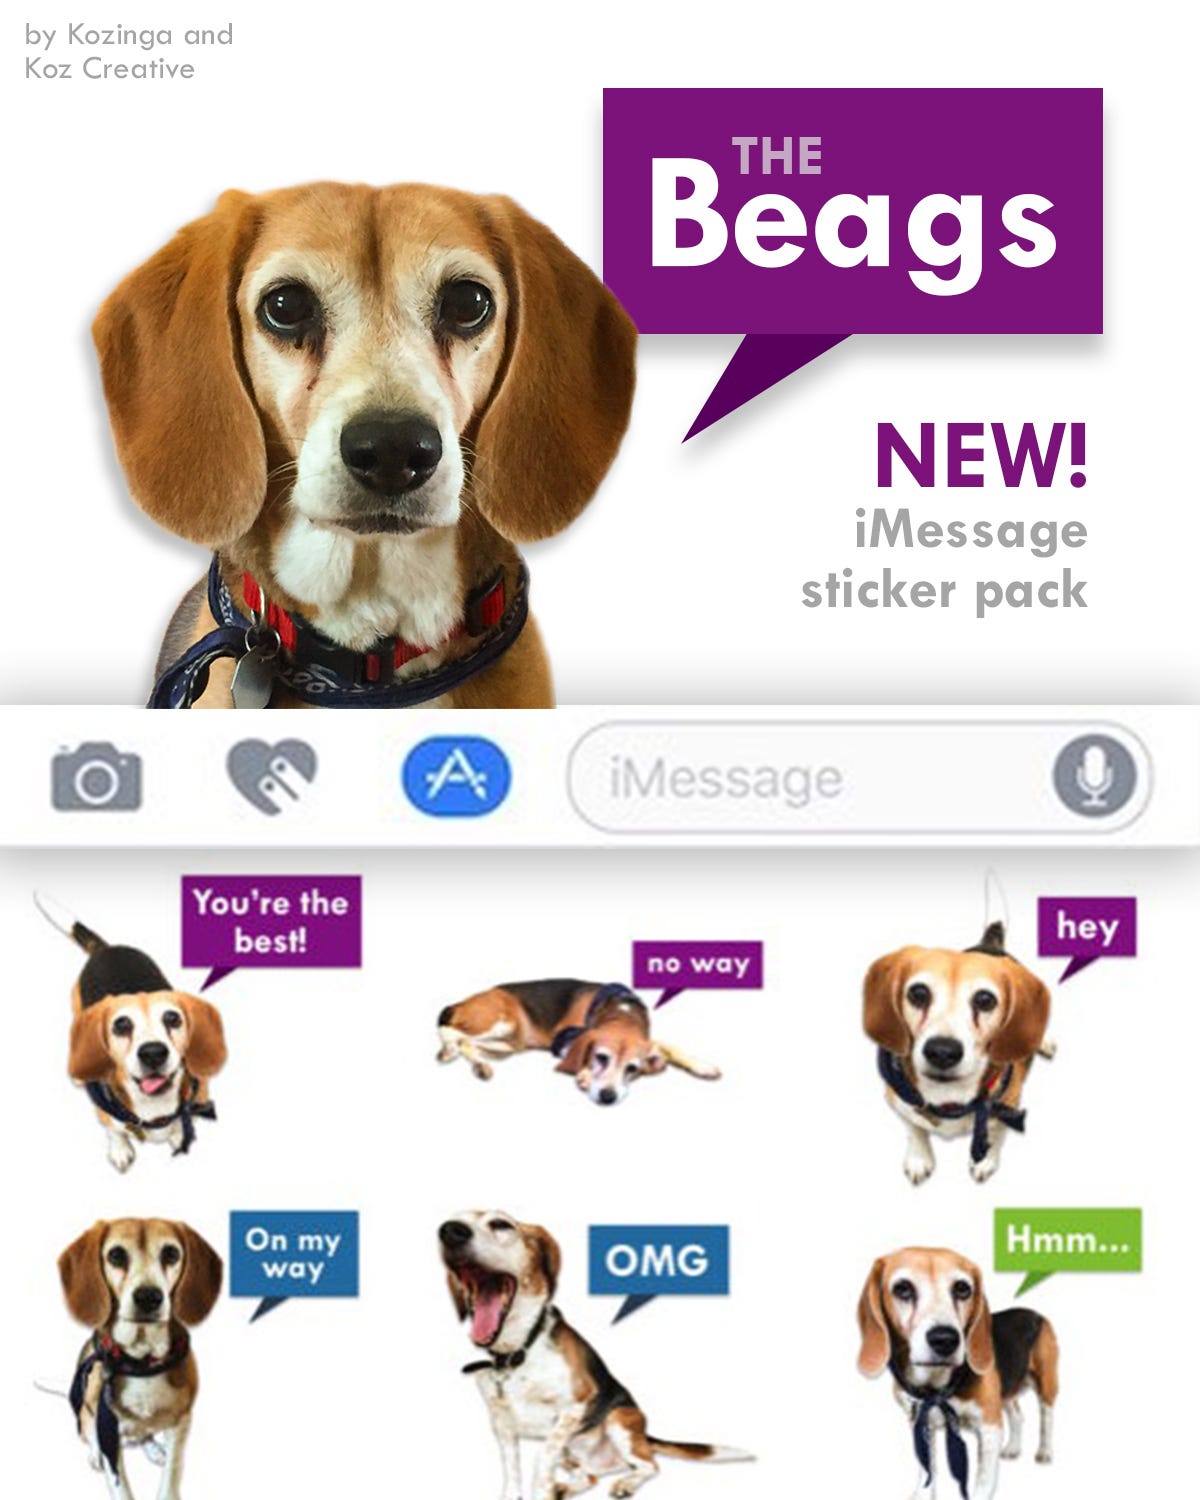 The Beags Simply Amazing Beagles Ios Sticker Pack